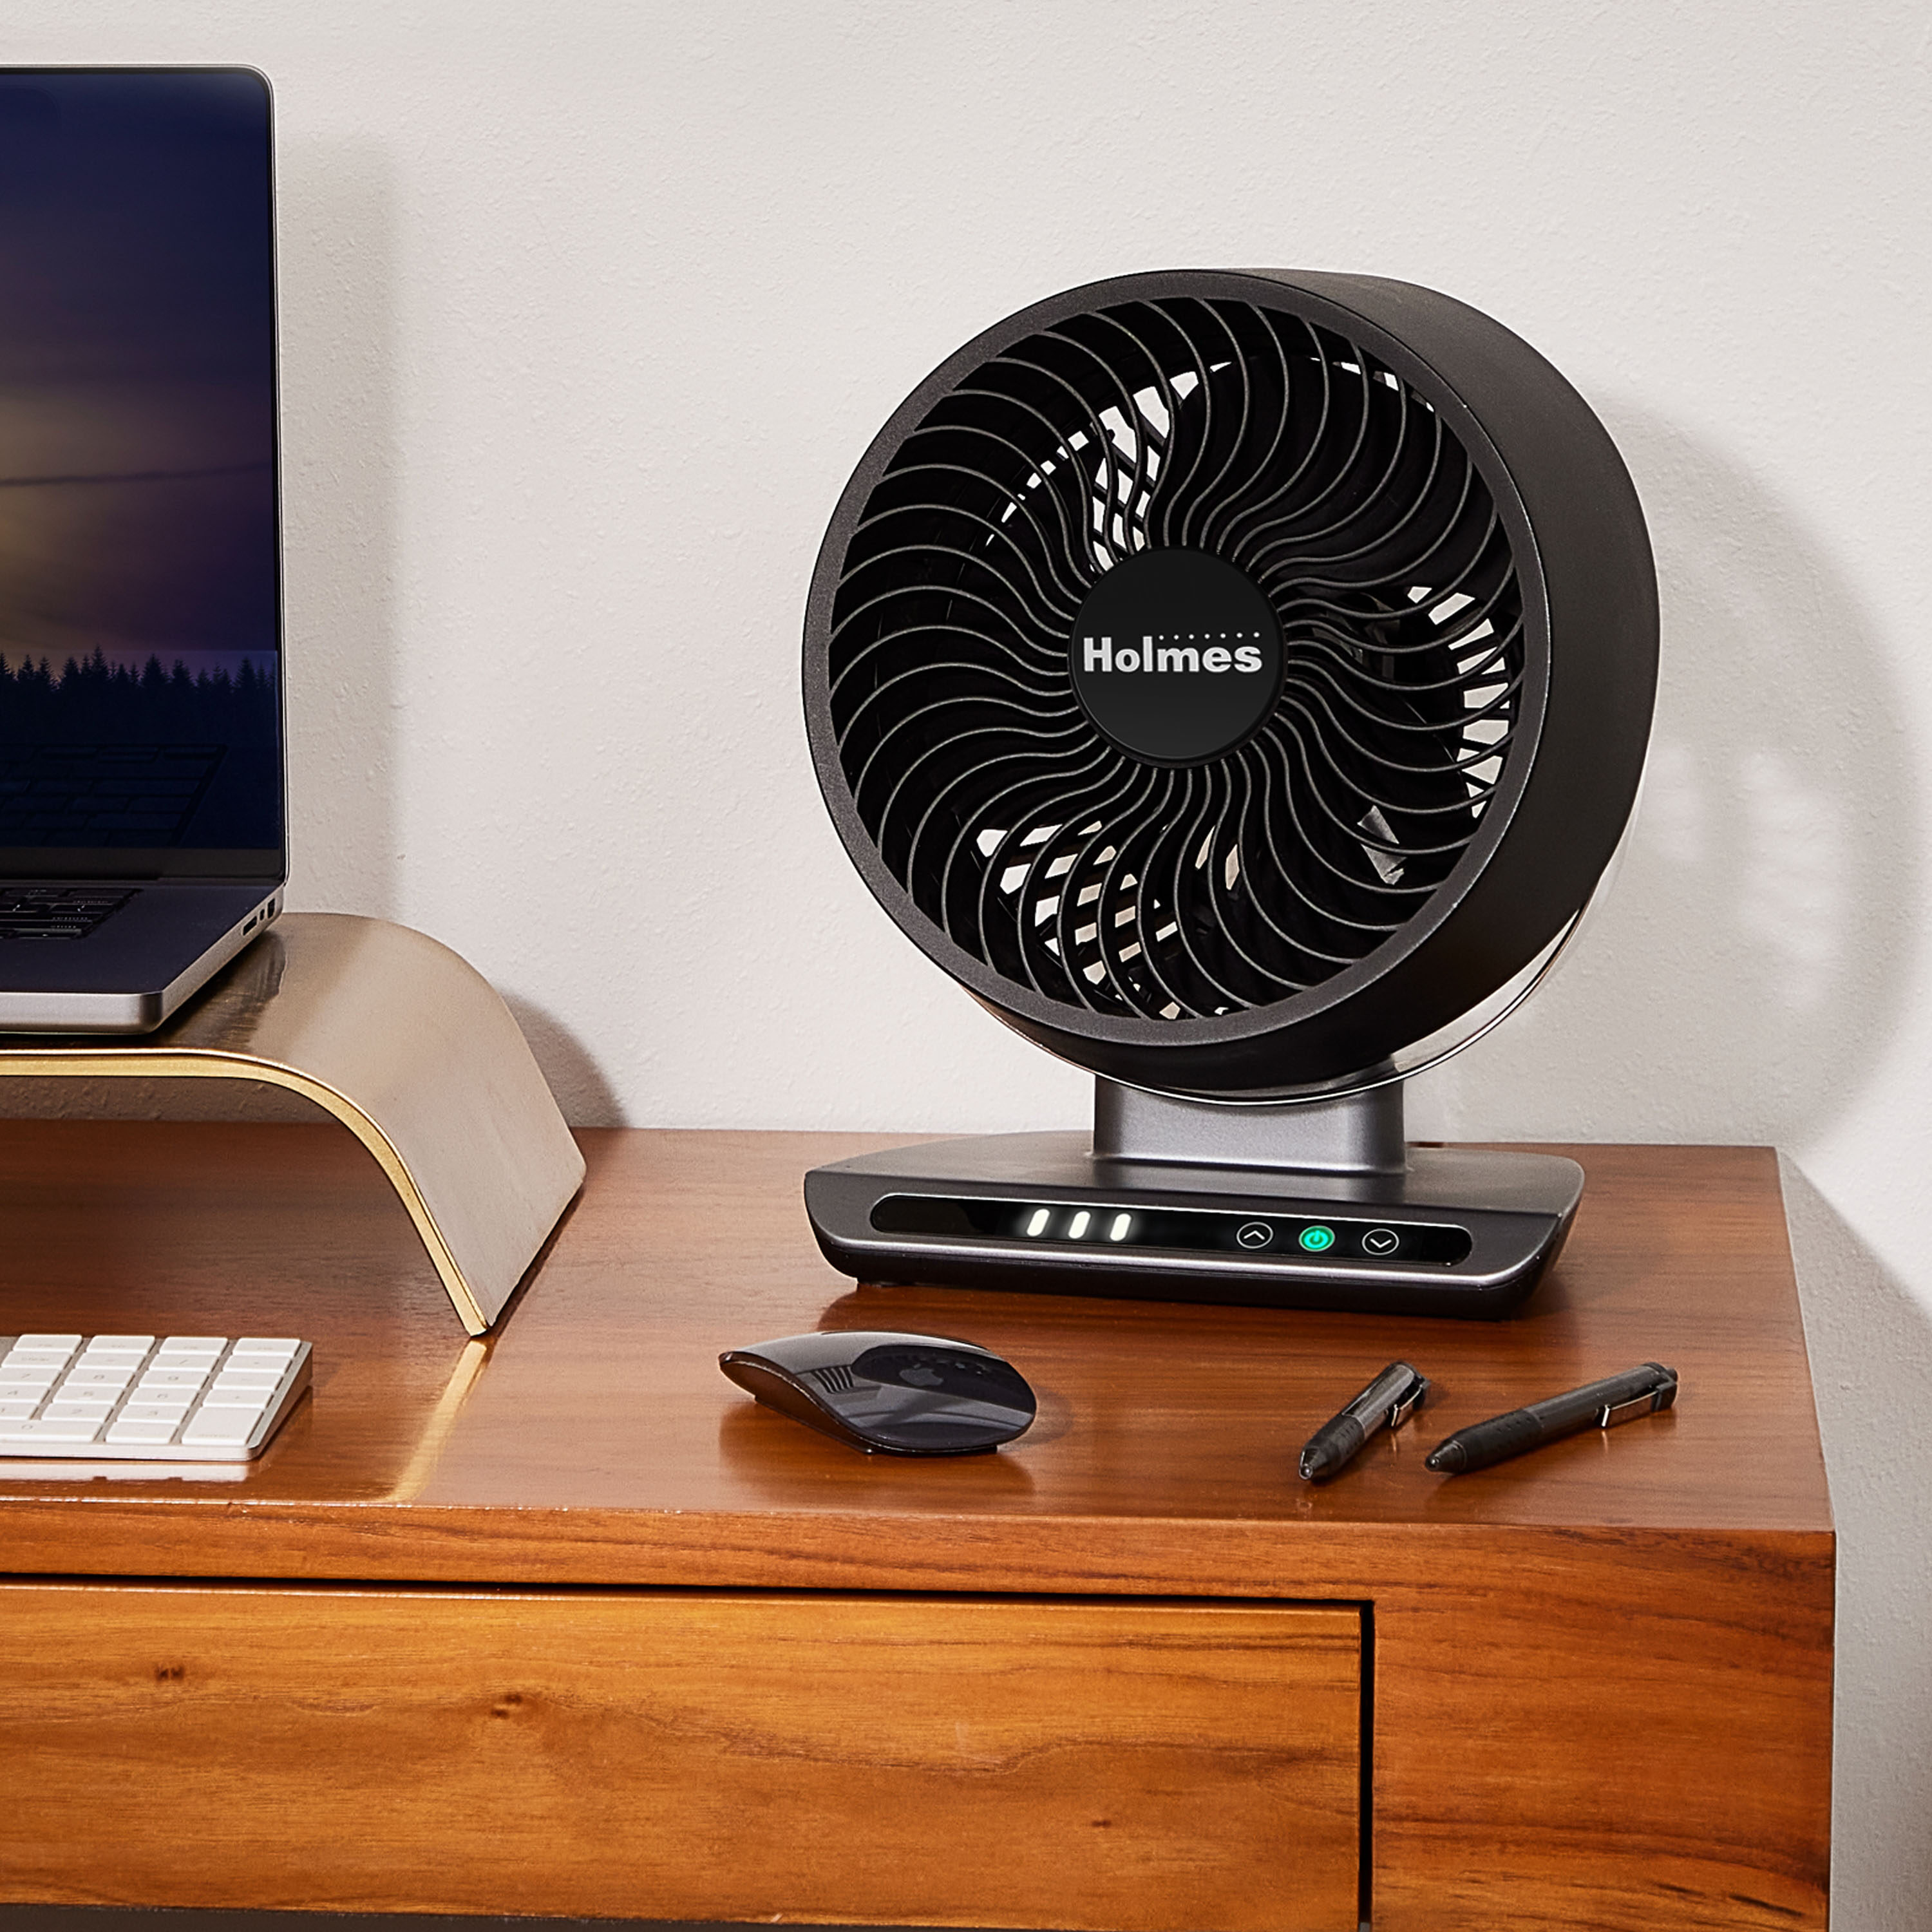 BEYOND BREEZE Oscillating Table Fan 12-Inch, Quiet 3-Speed Portable Small  Desk Fan with Adjustable Tilt and Safety Grille, Ideal for Bedroom, Office